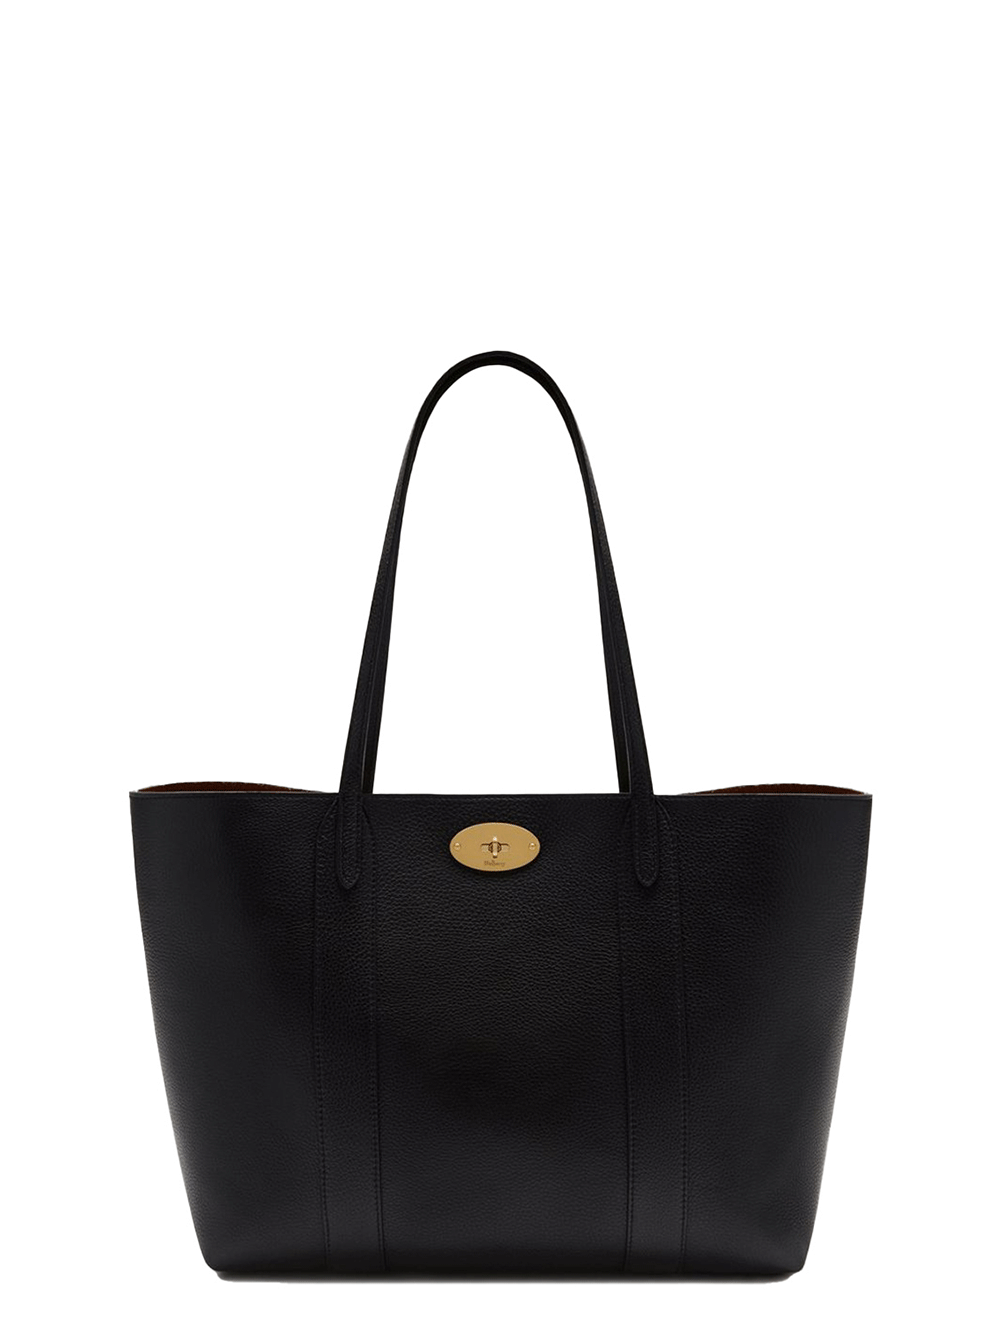 Mulberry-Bayswater-Tote-Small-Classic-Grain-Black-1